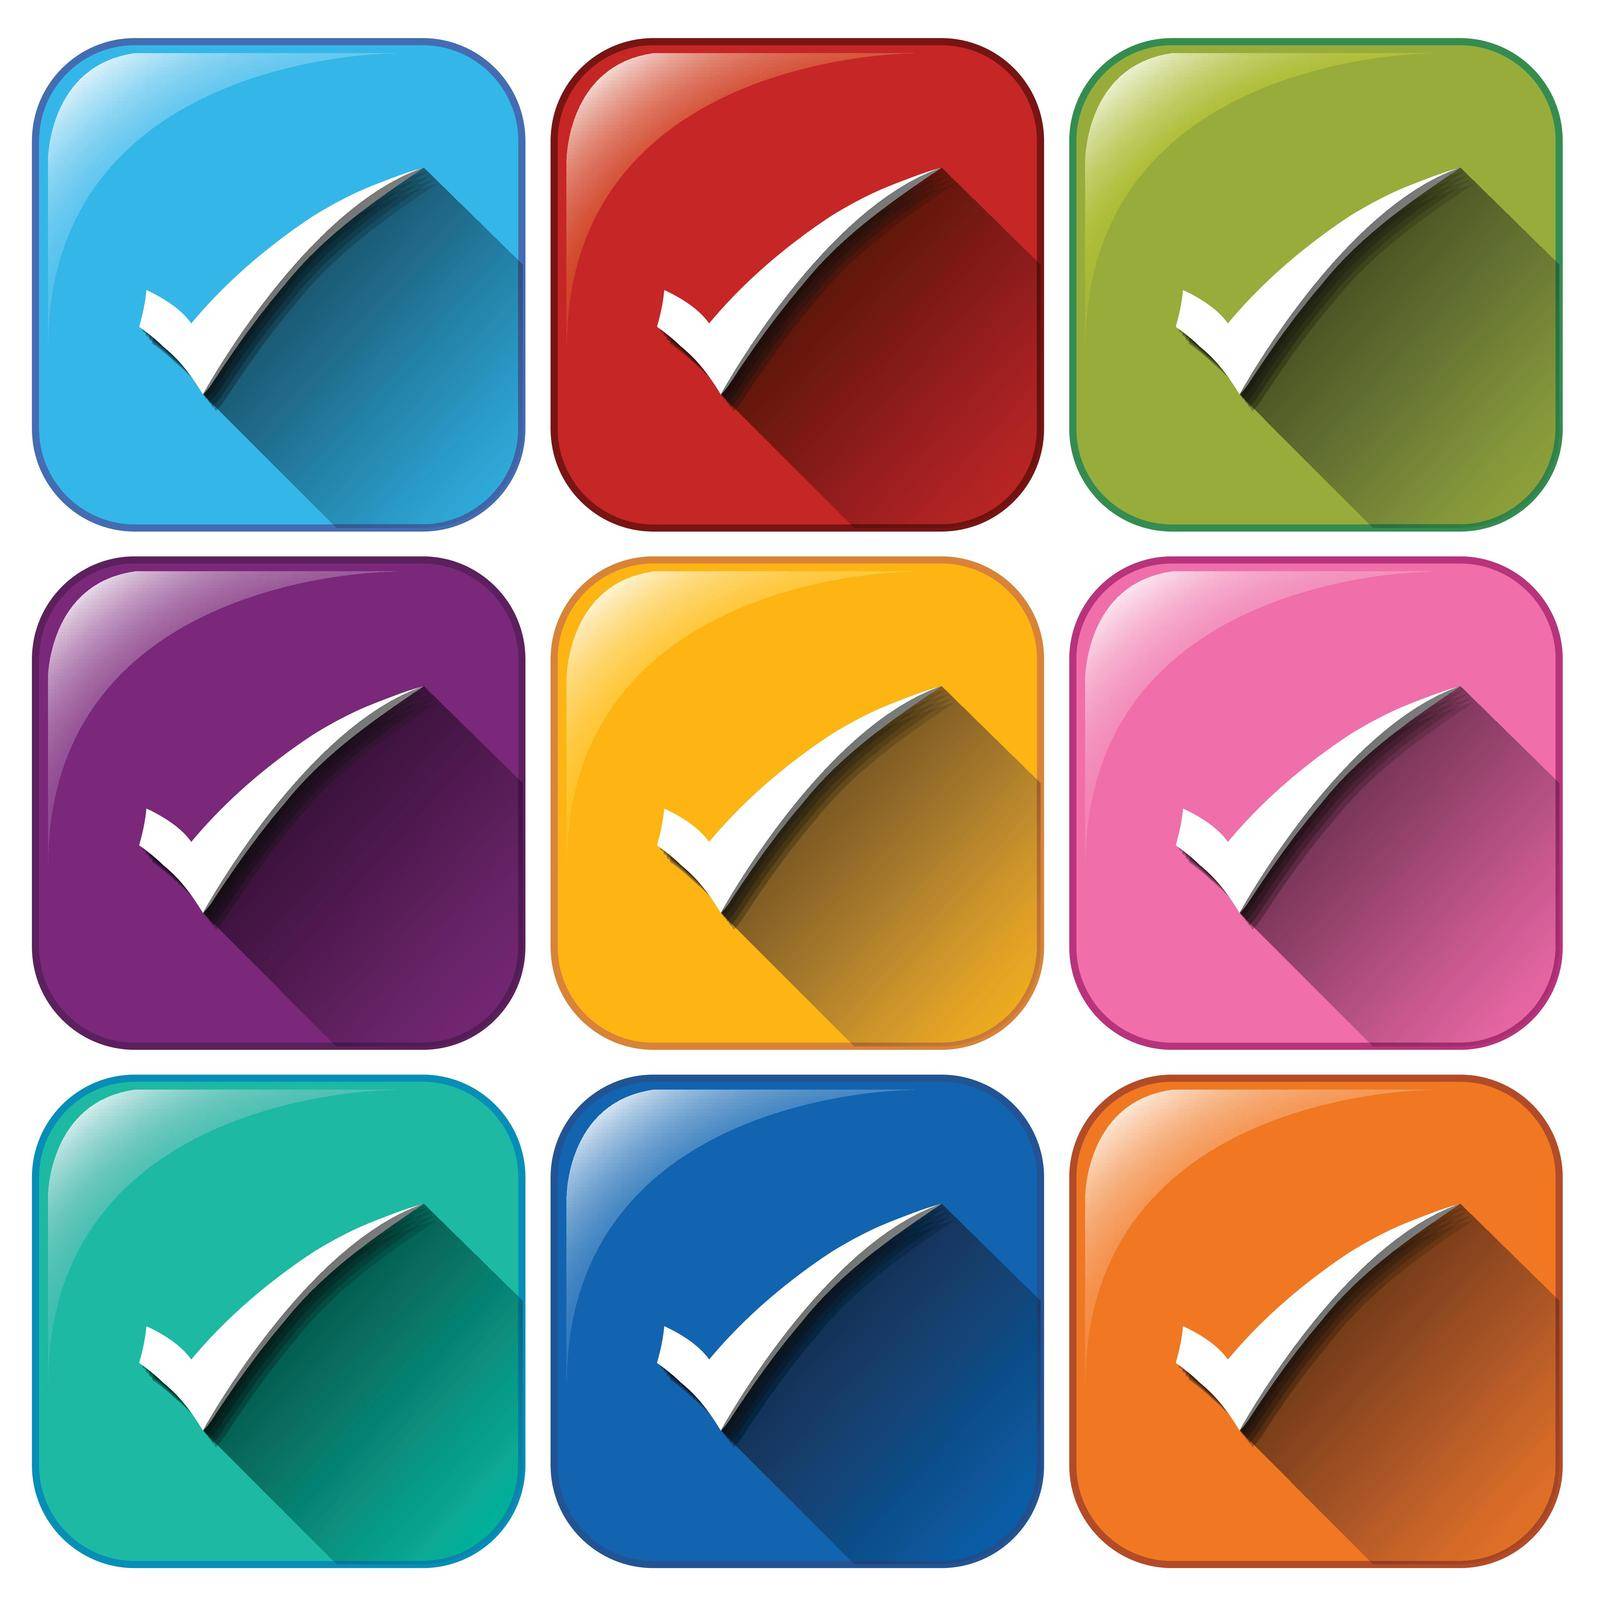 Buttons with check marks by iimages